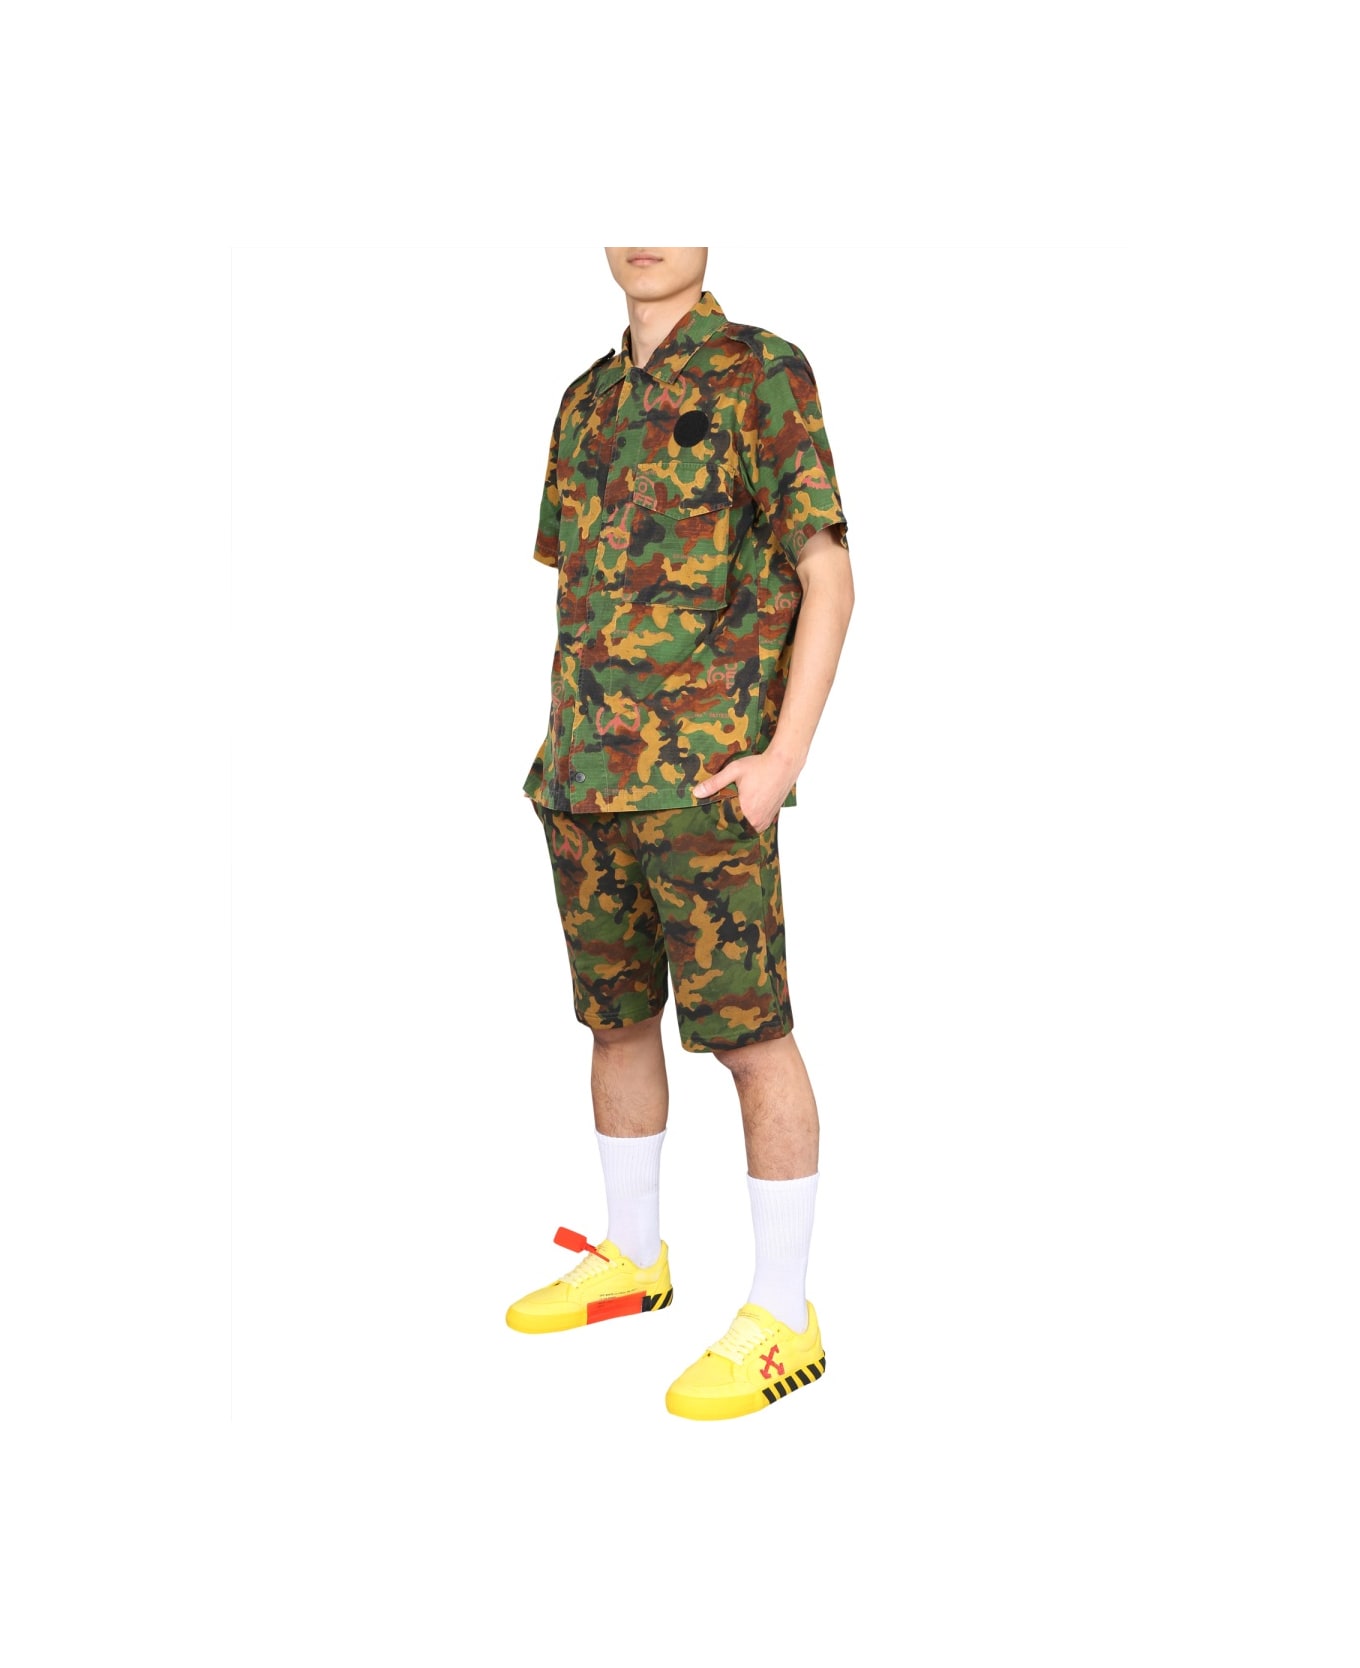 Off-White Camouflage Shirt - MILITARY GREEN